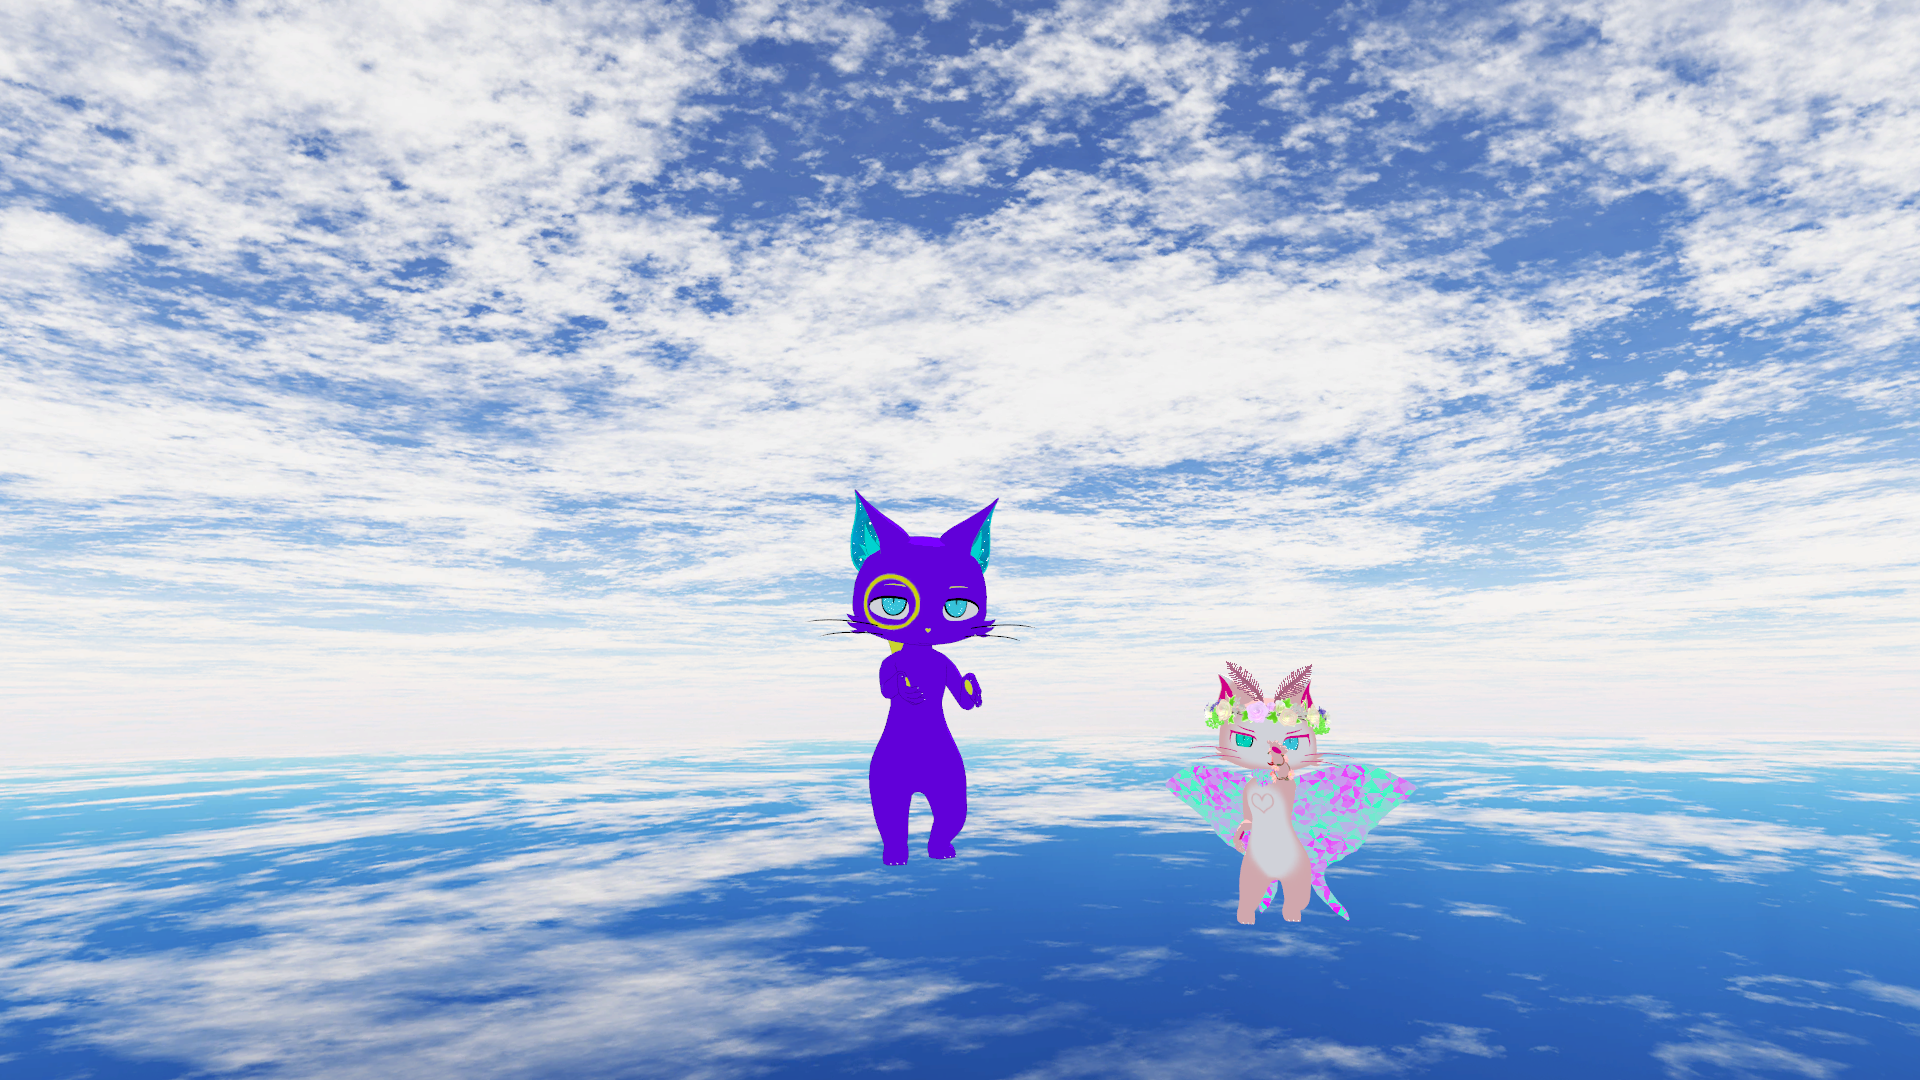 Two cats, one pink with wings and one purple with blue eyes float above ground with the sky above.